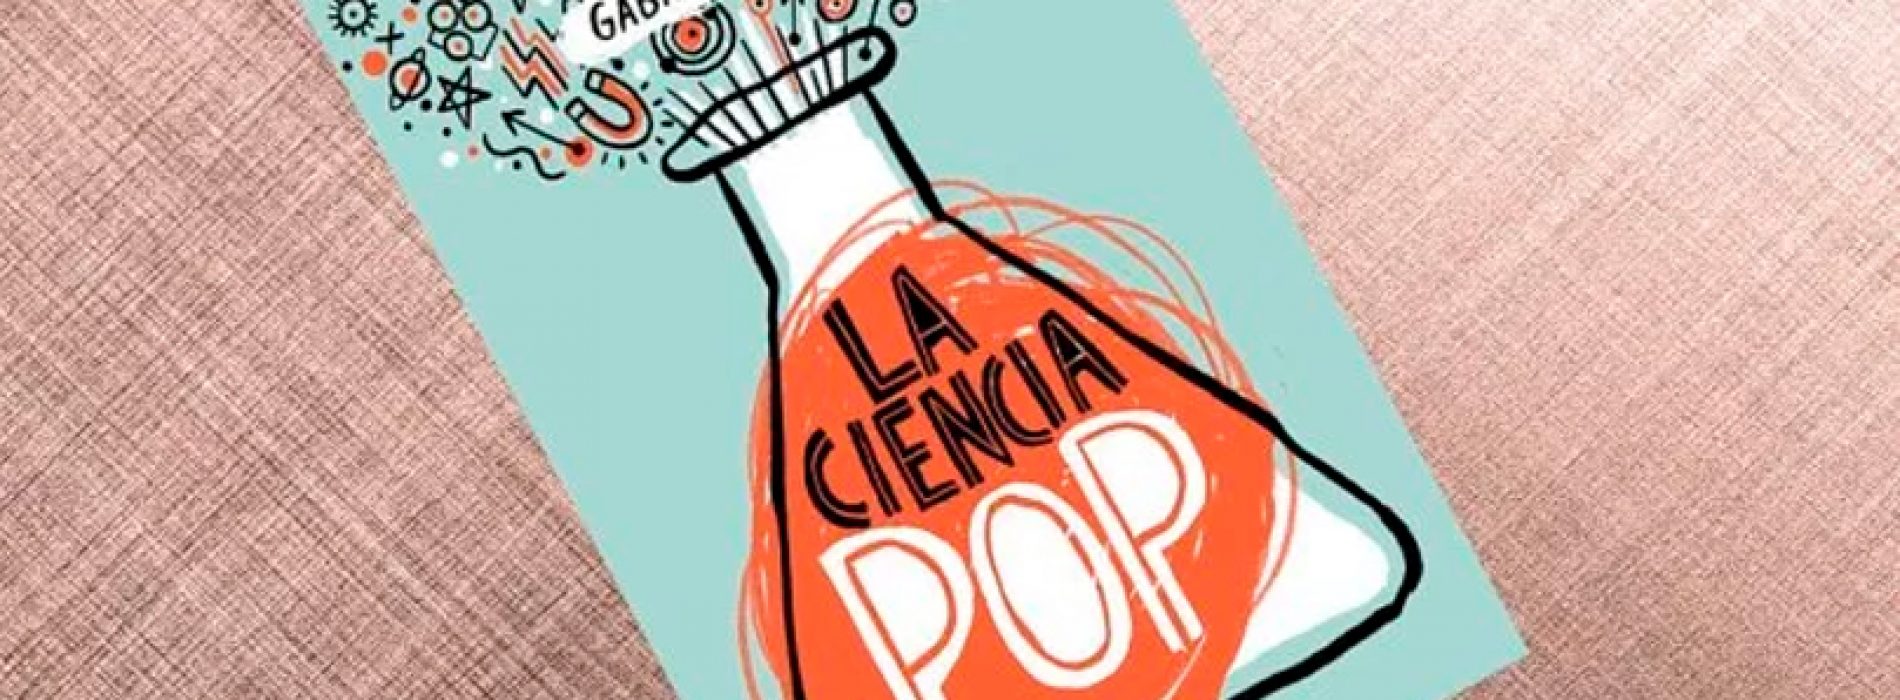 Gabriel Leon talks about her successful Pop science book: "the best lesson is that a public interested in science there is"